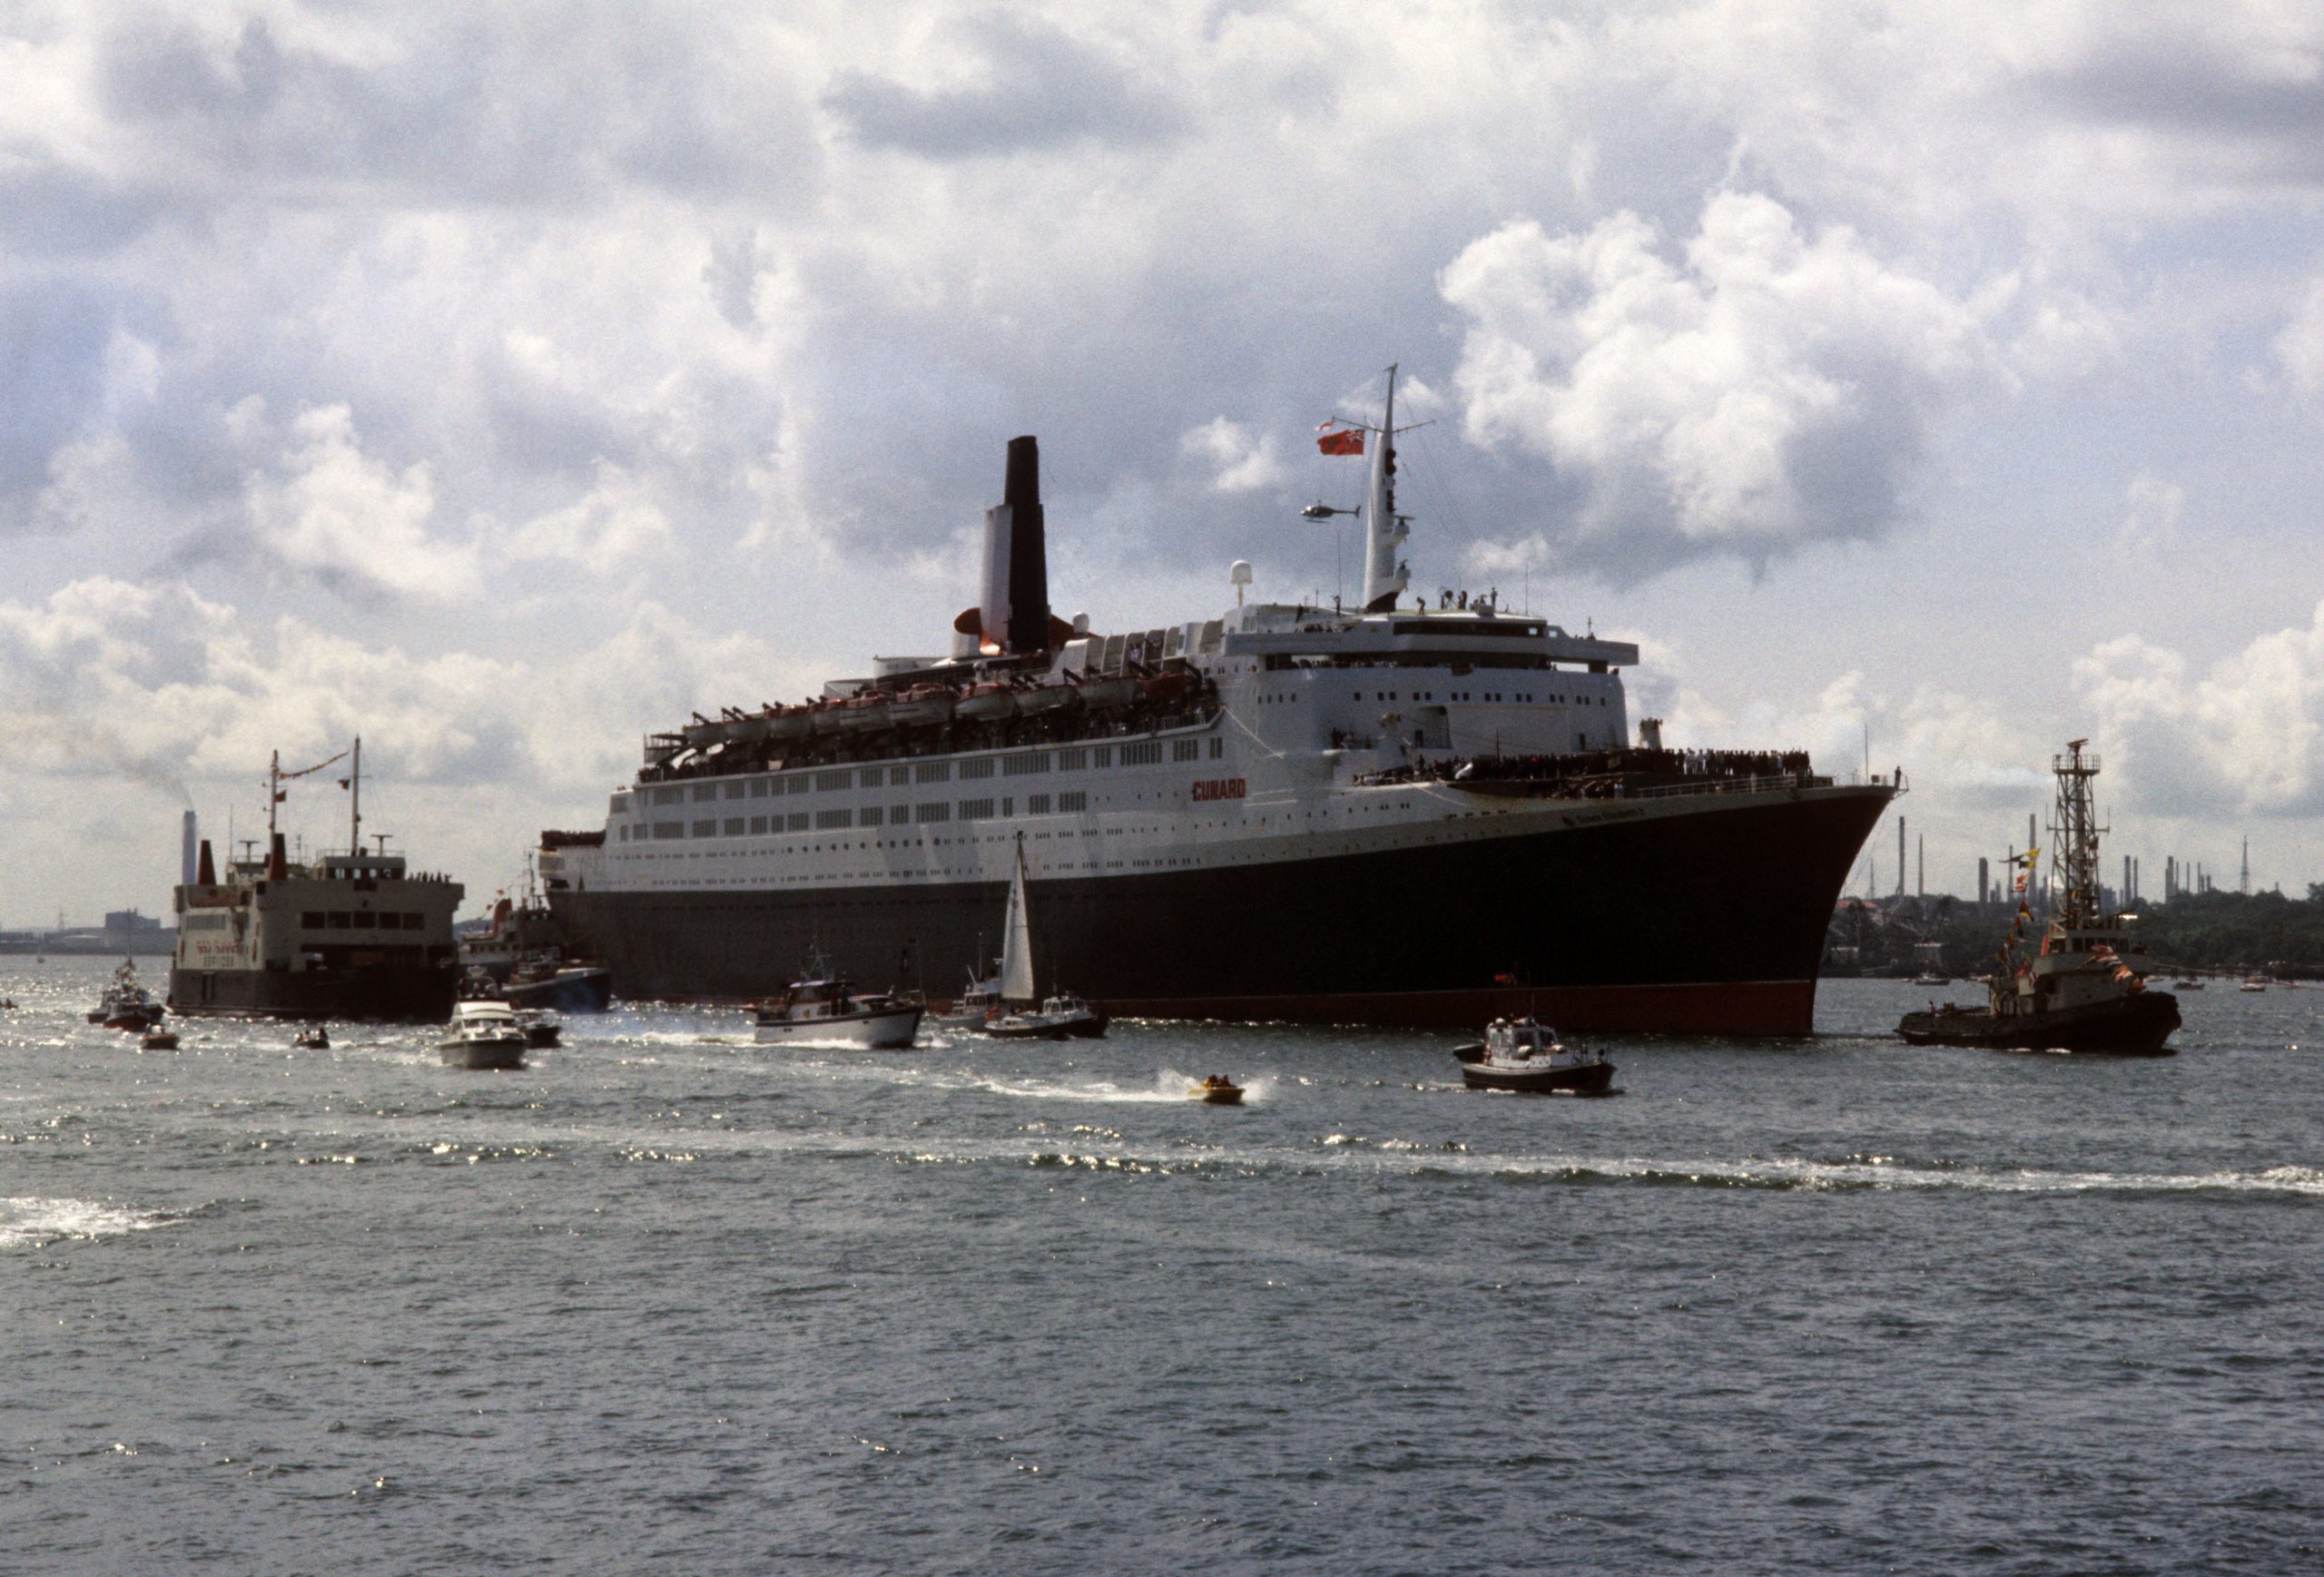 Sailing with the Queen – Life onboard the QE2 before and during the Falklands Campaign